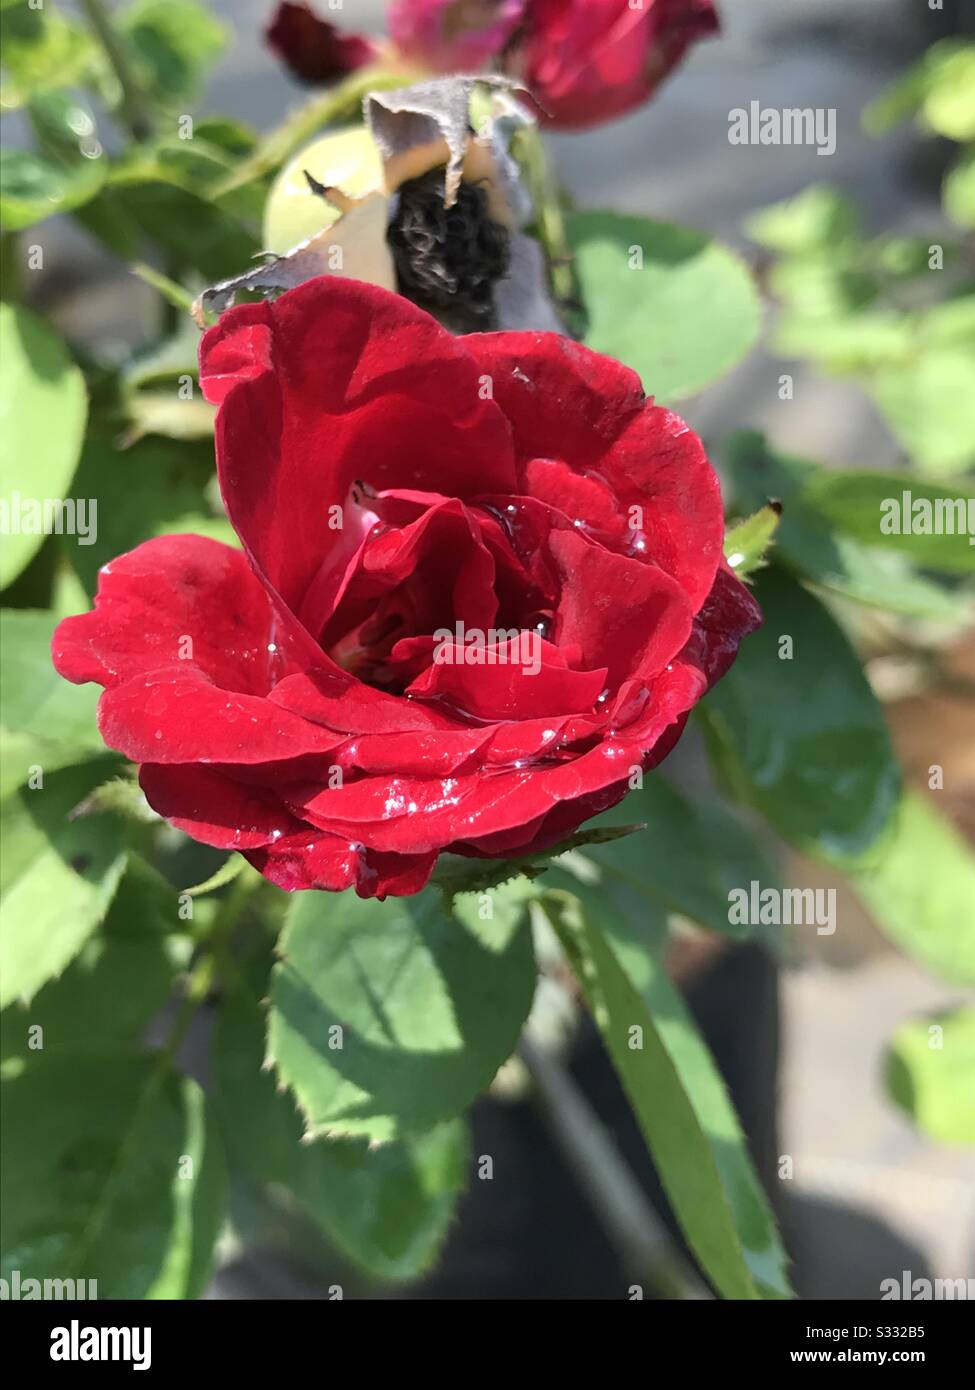 Bright Red Carnation Roses With Water Sprinkled On It Found In A